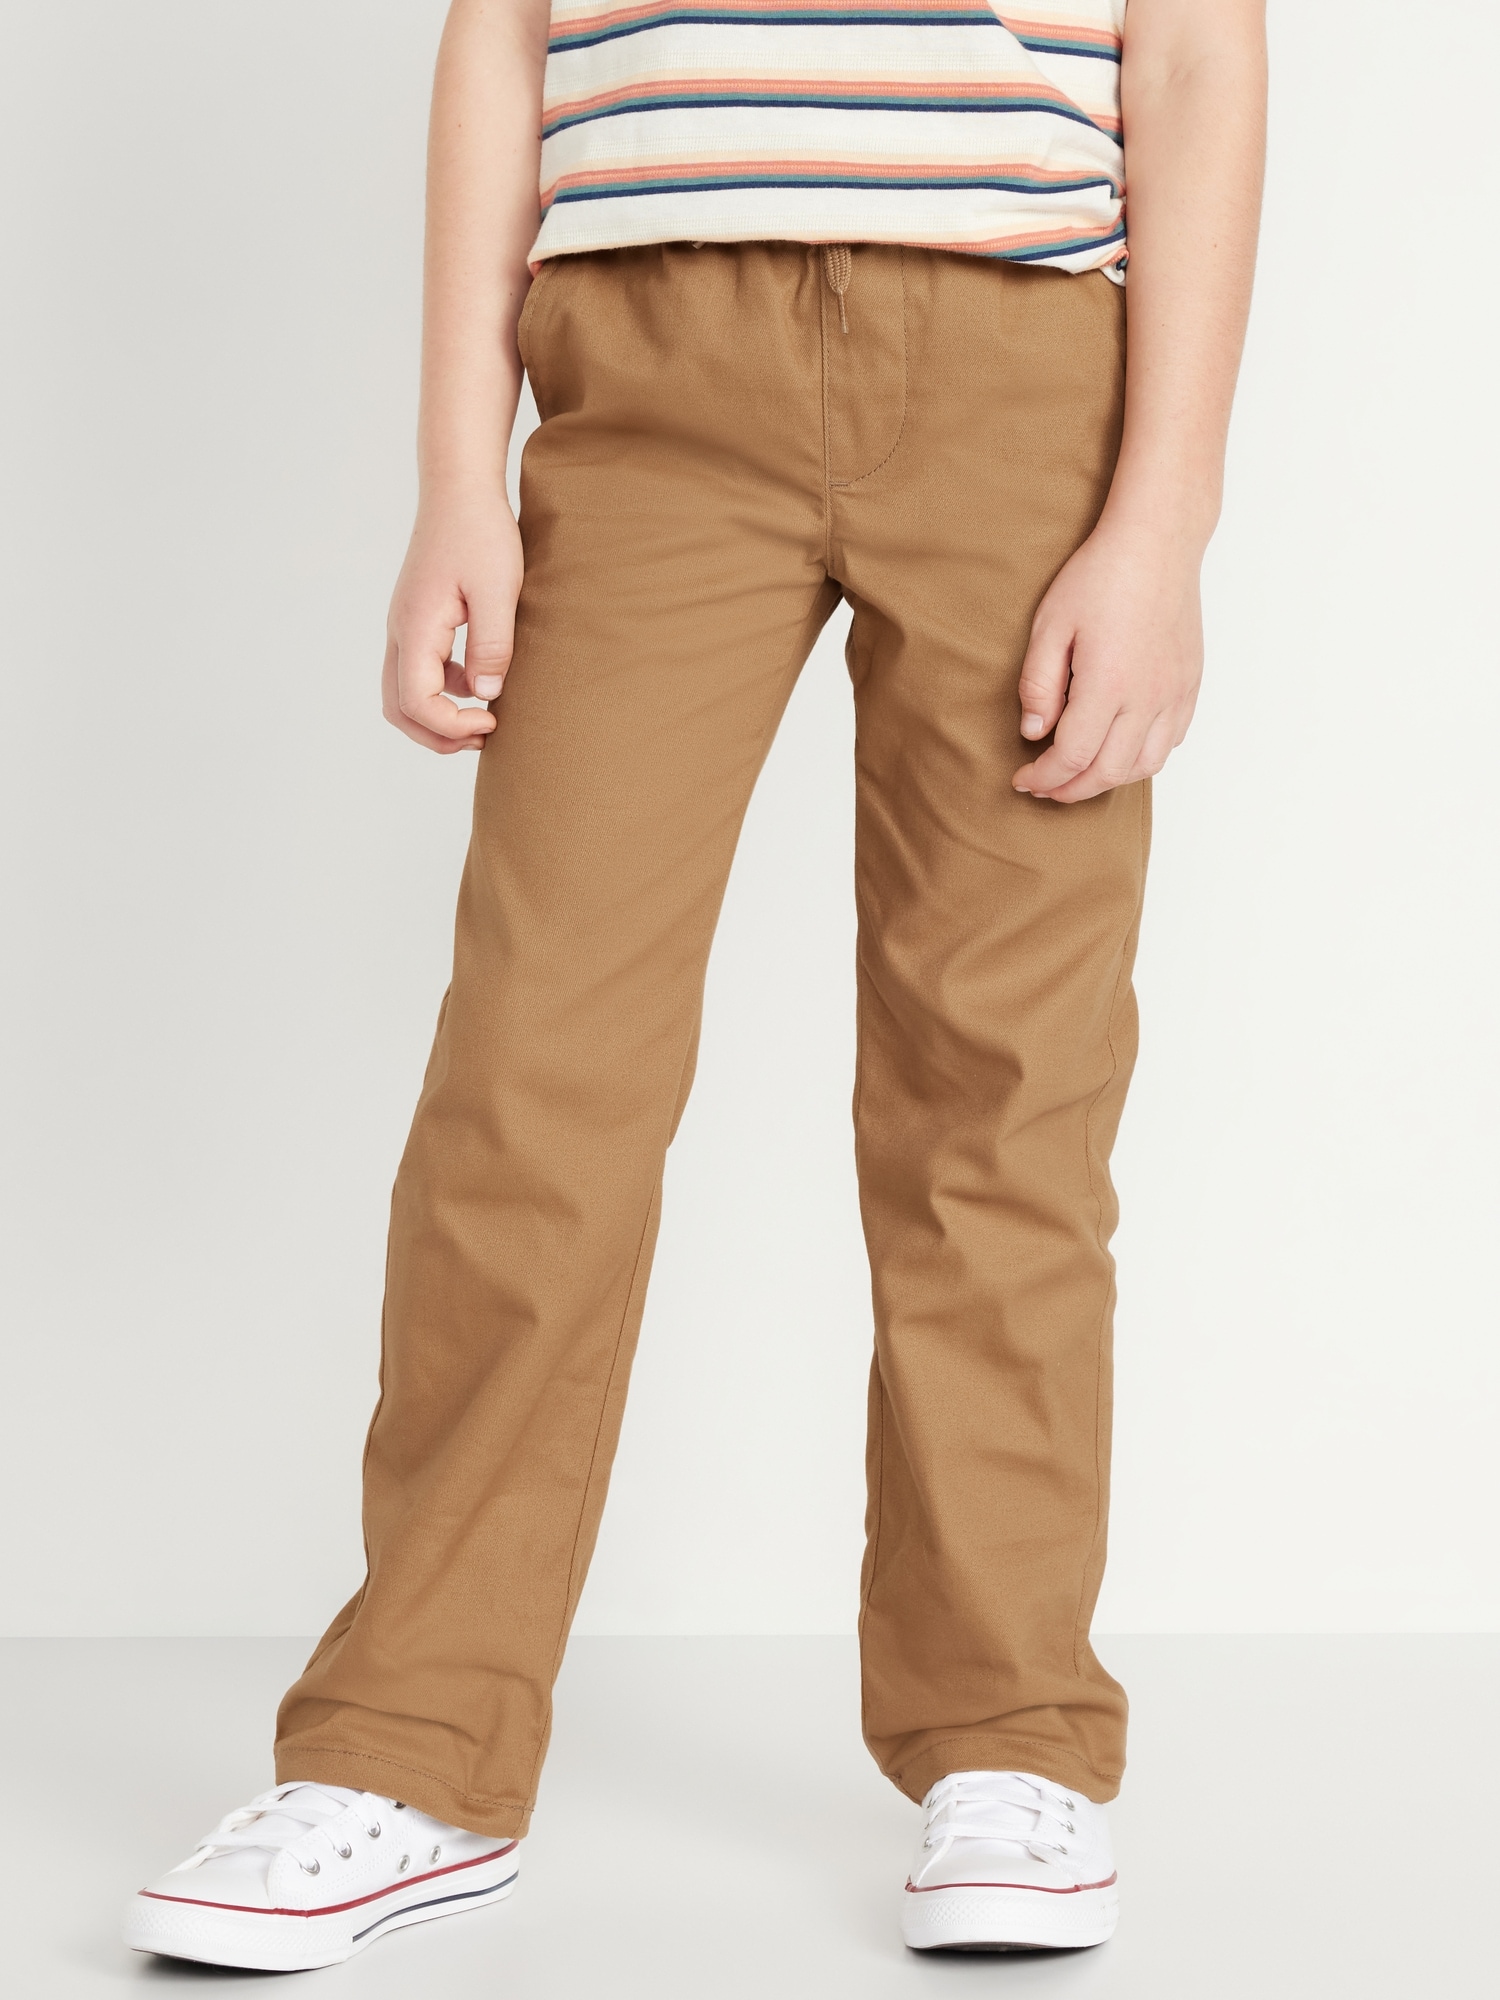 Boy's Pants & Chinos from Volcom | Pants for Kids – Volcom US